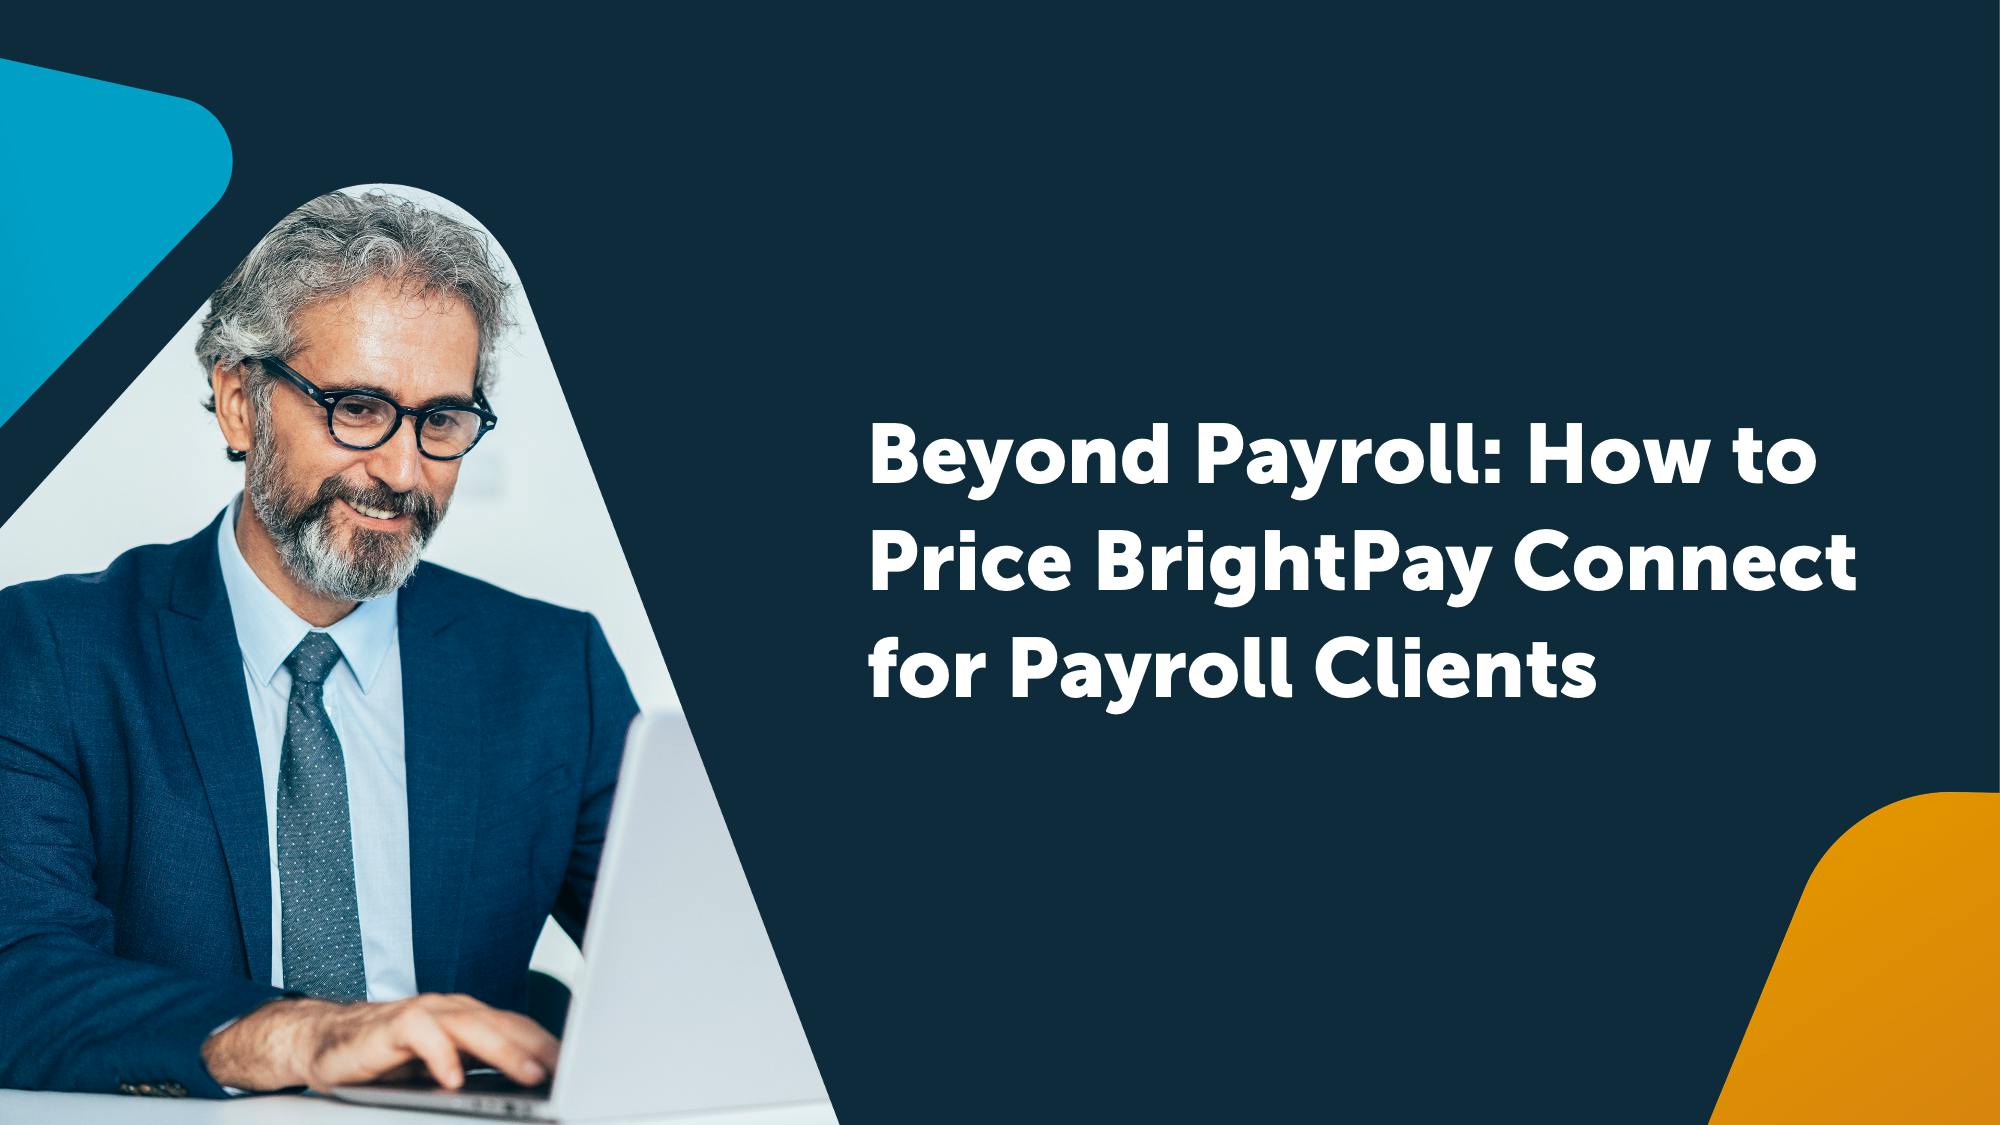 Beyond Payroll: How to Price BrightPay Connect for Payroll Clients